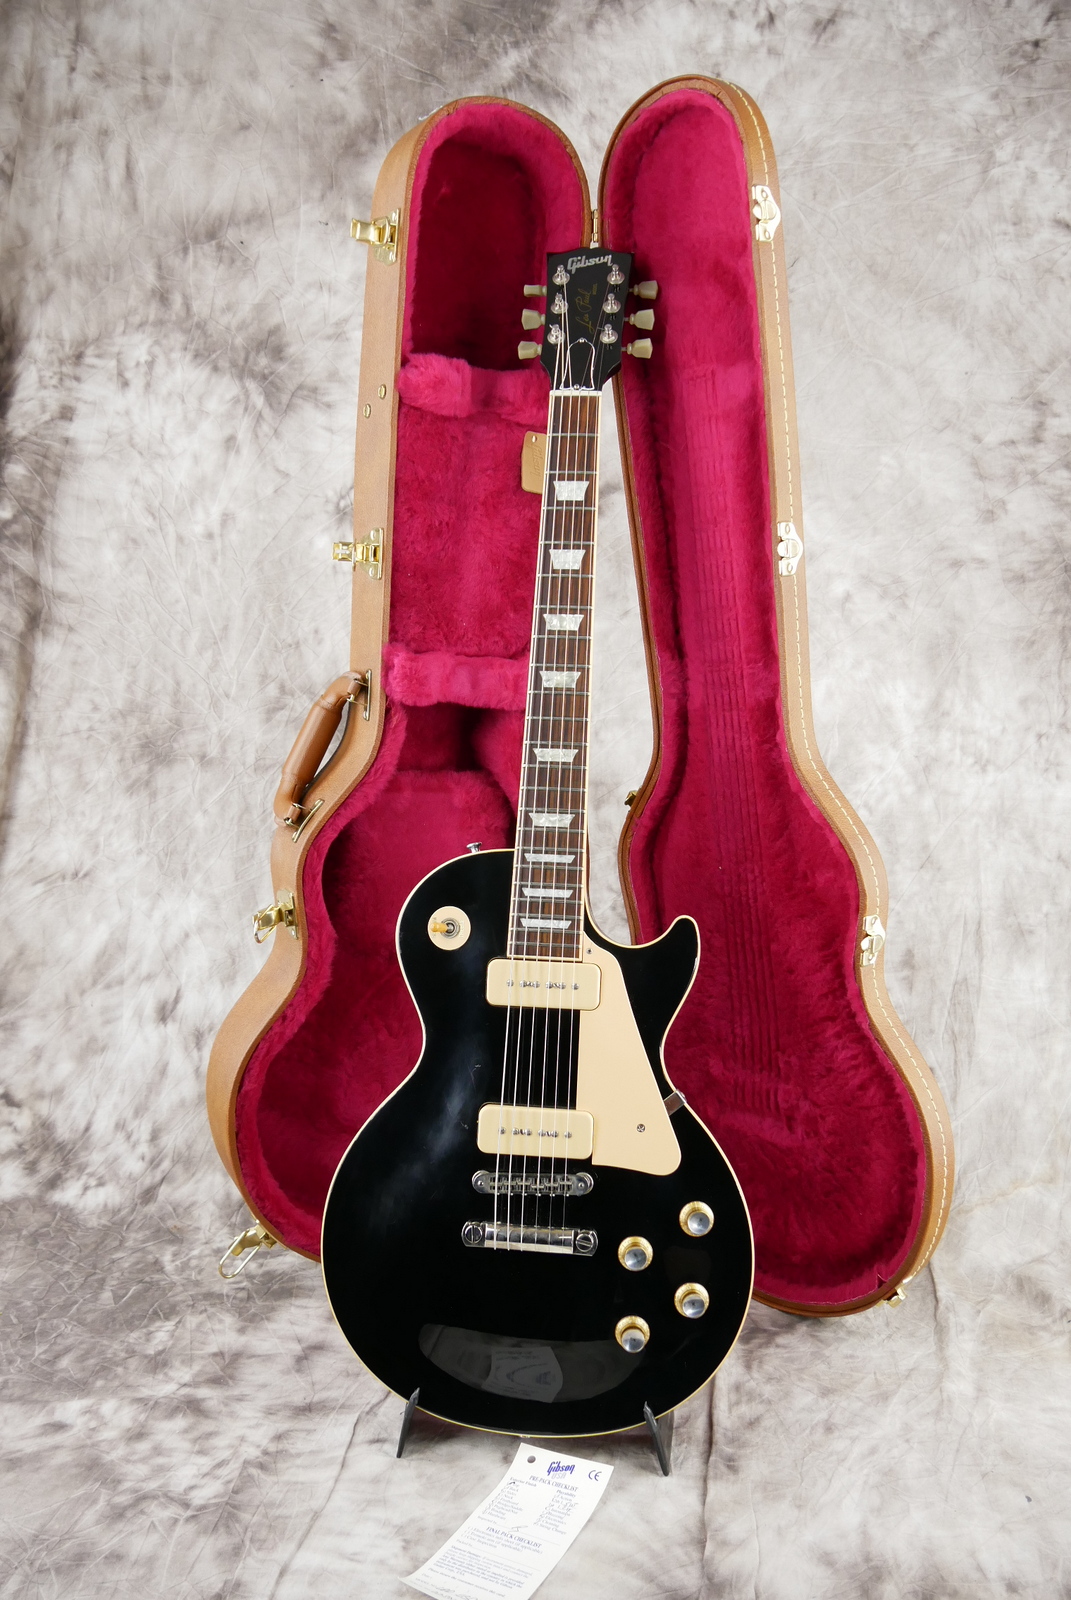 img/vintage/5337/Gibson_Les_Paul_Deluxe_limited_edtion_black_2000-015.JPG